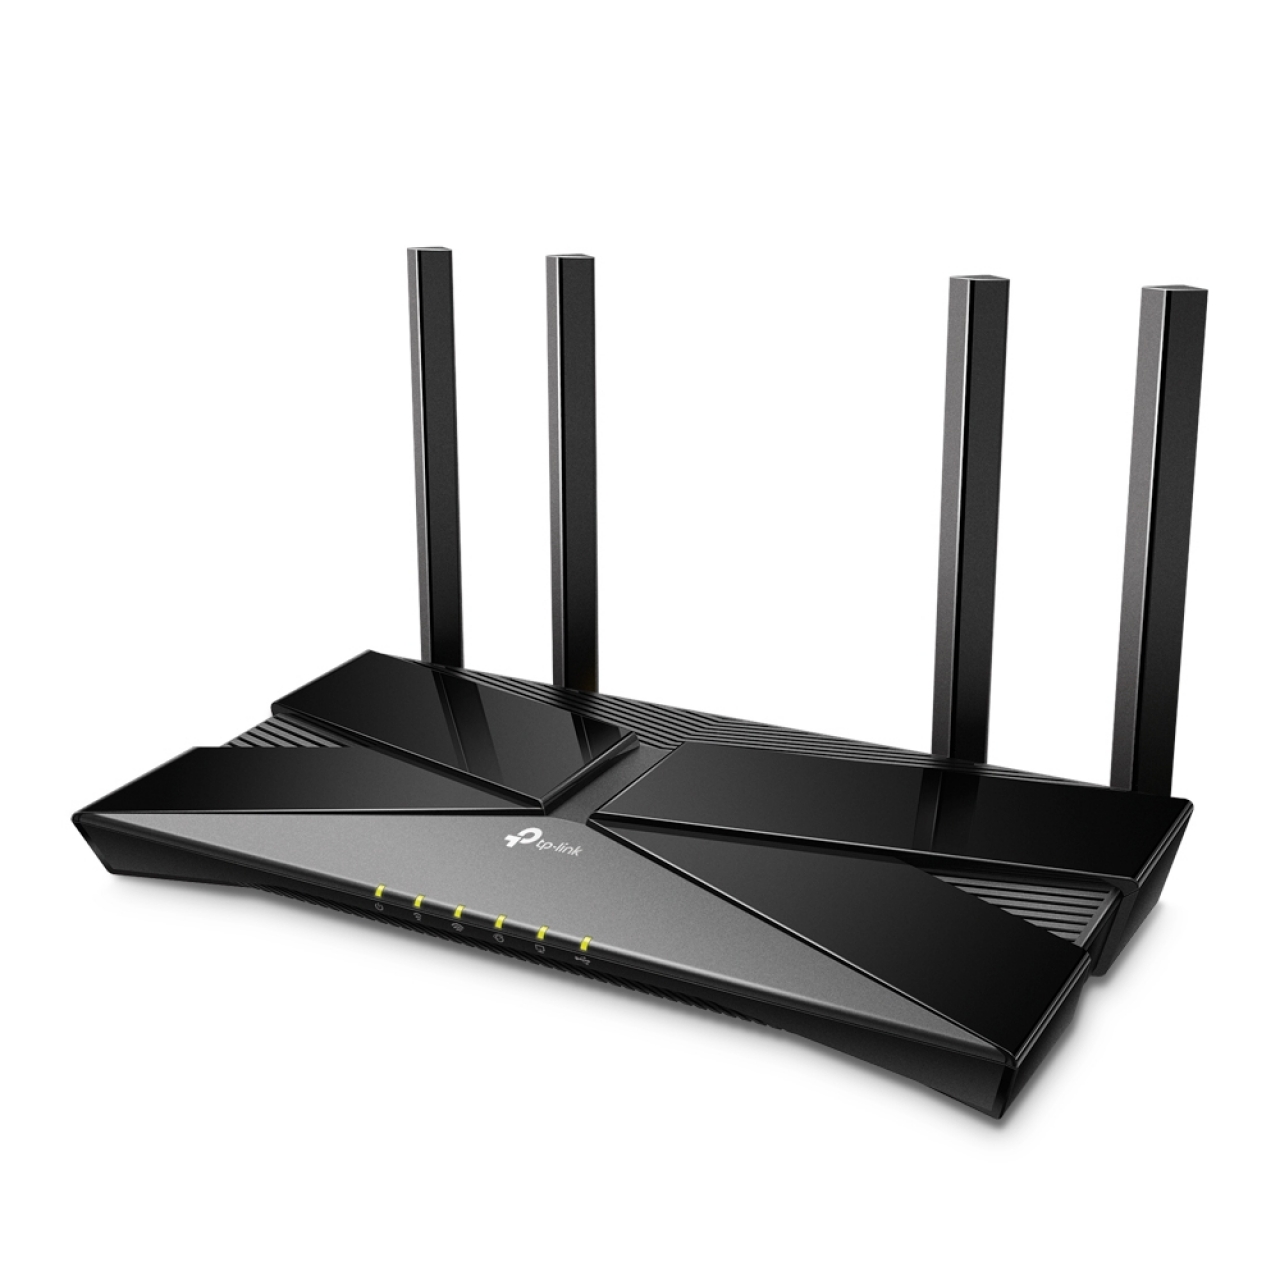 TP-LINK ARCHER AX20 1800MBPS AX1800 Dual Band EV Ofis Tipi Gaming Router